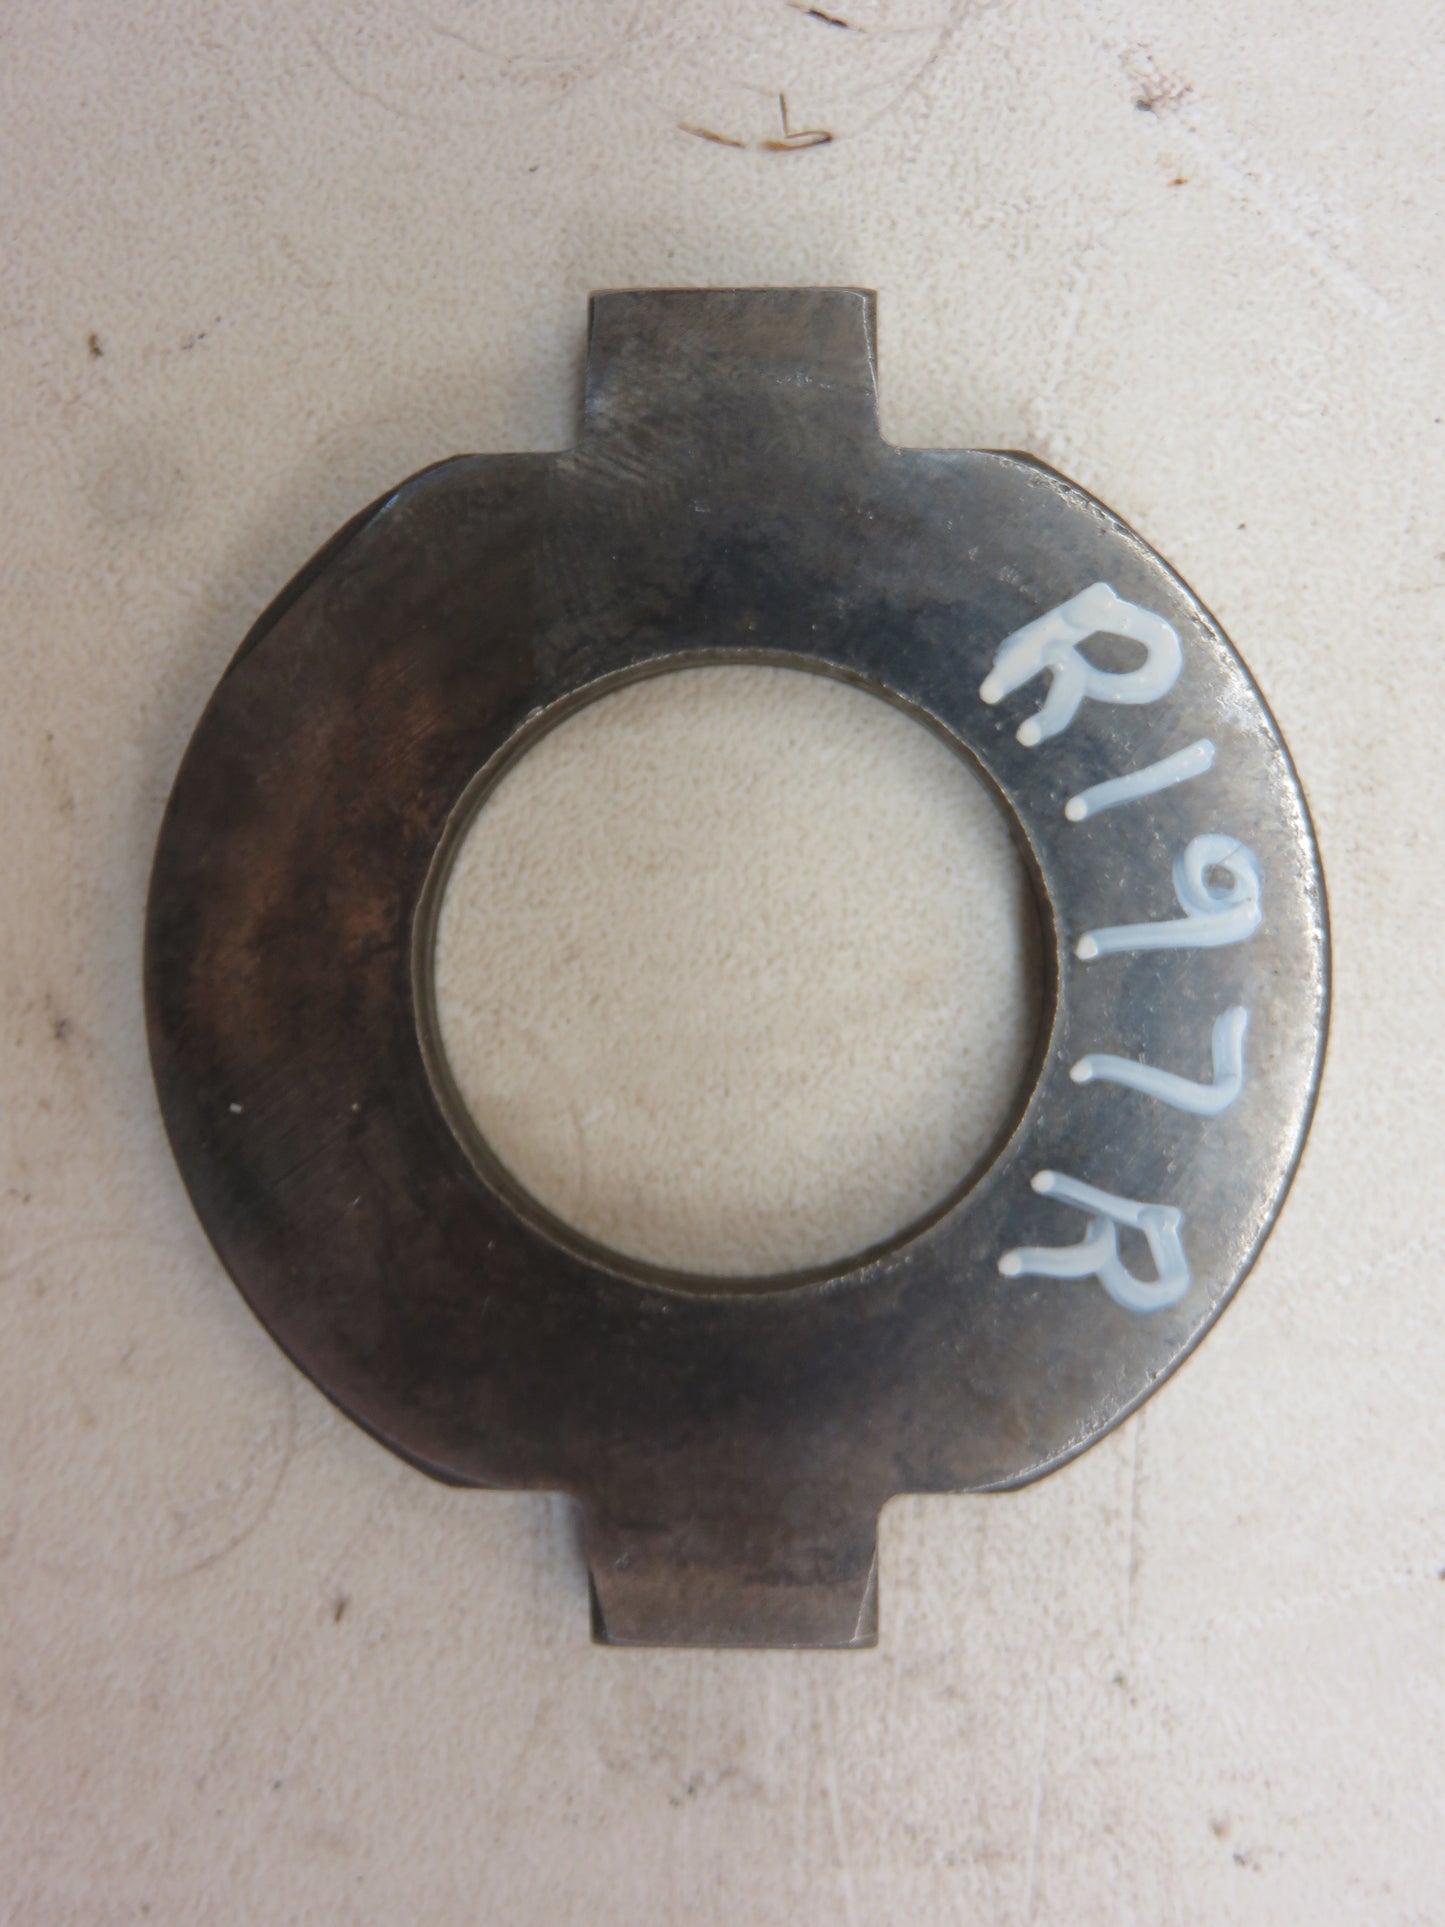 R197R John Deere Fan And Engine Oil Pump Drive Thrust Washer For R, 70, 80, 720, 820, 730, 830